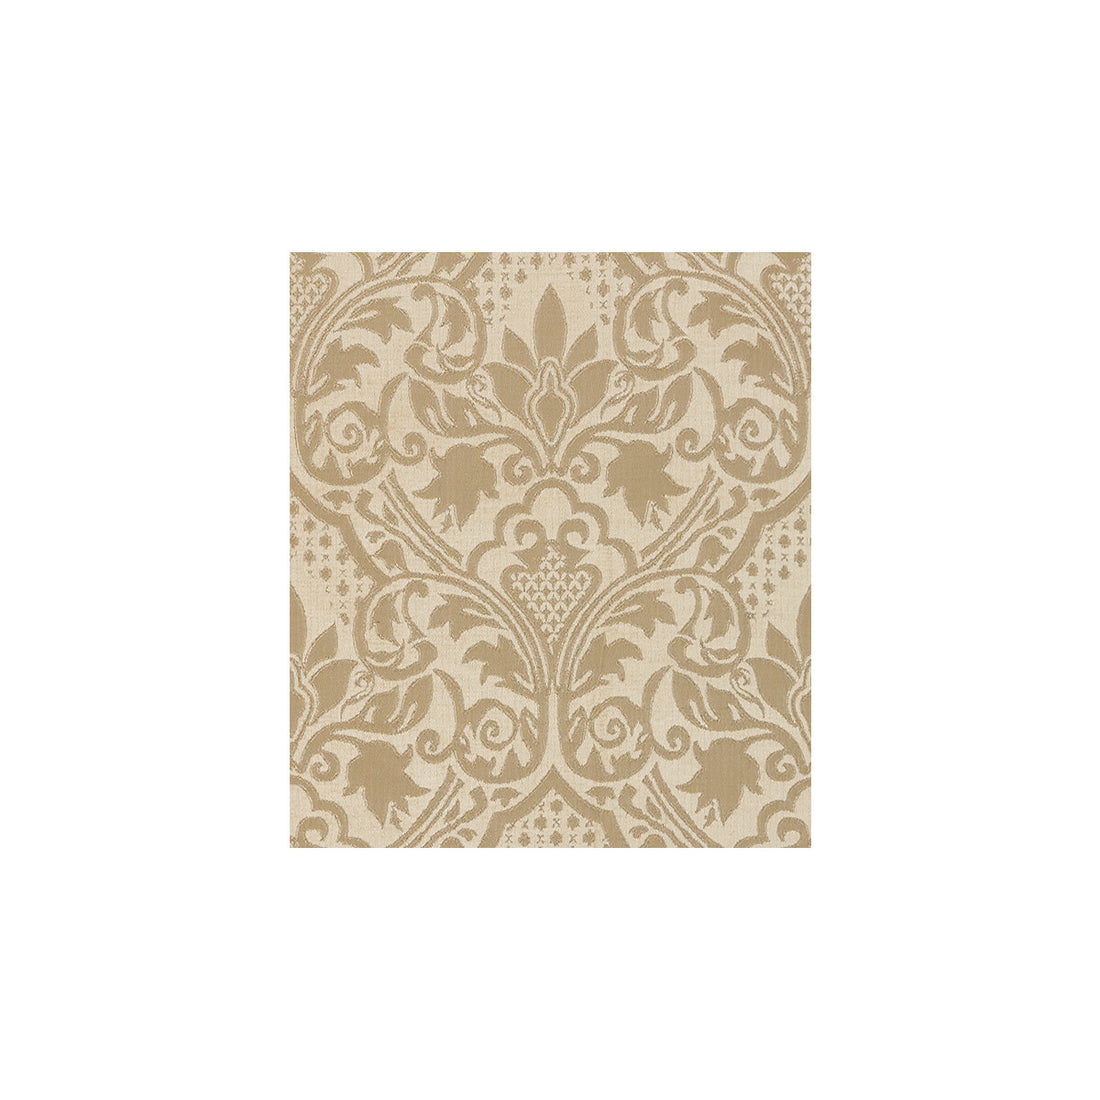 The Gold Standard fabric in blanc color - pattern 29035.16.0 - by Kravet Couture